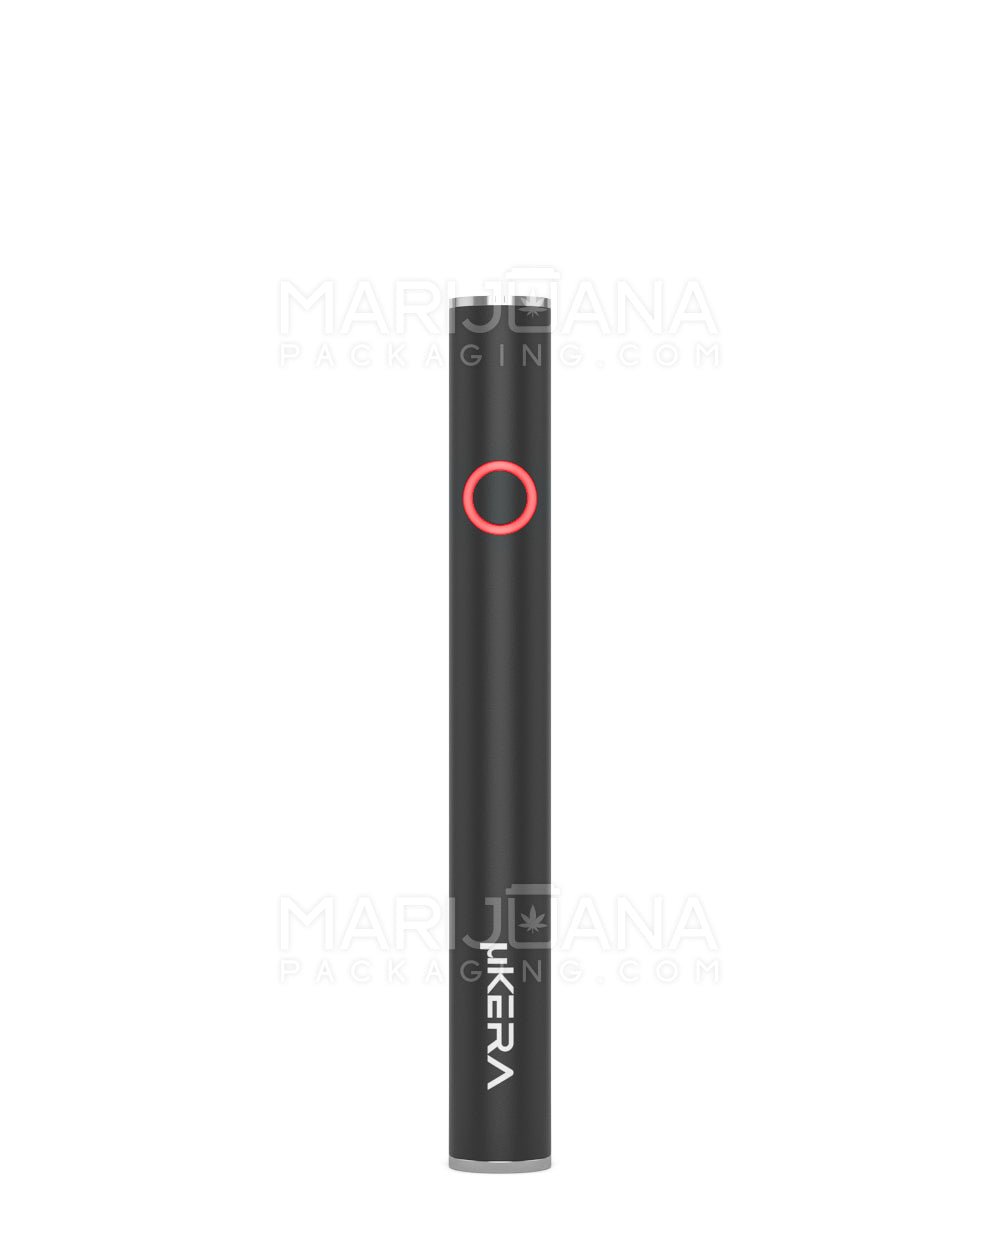 RAE | Variable Voltage Soft Touch Vape Battery | 320mAh - Black - 640 Count - 1